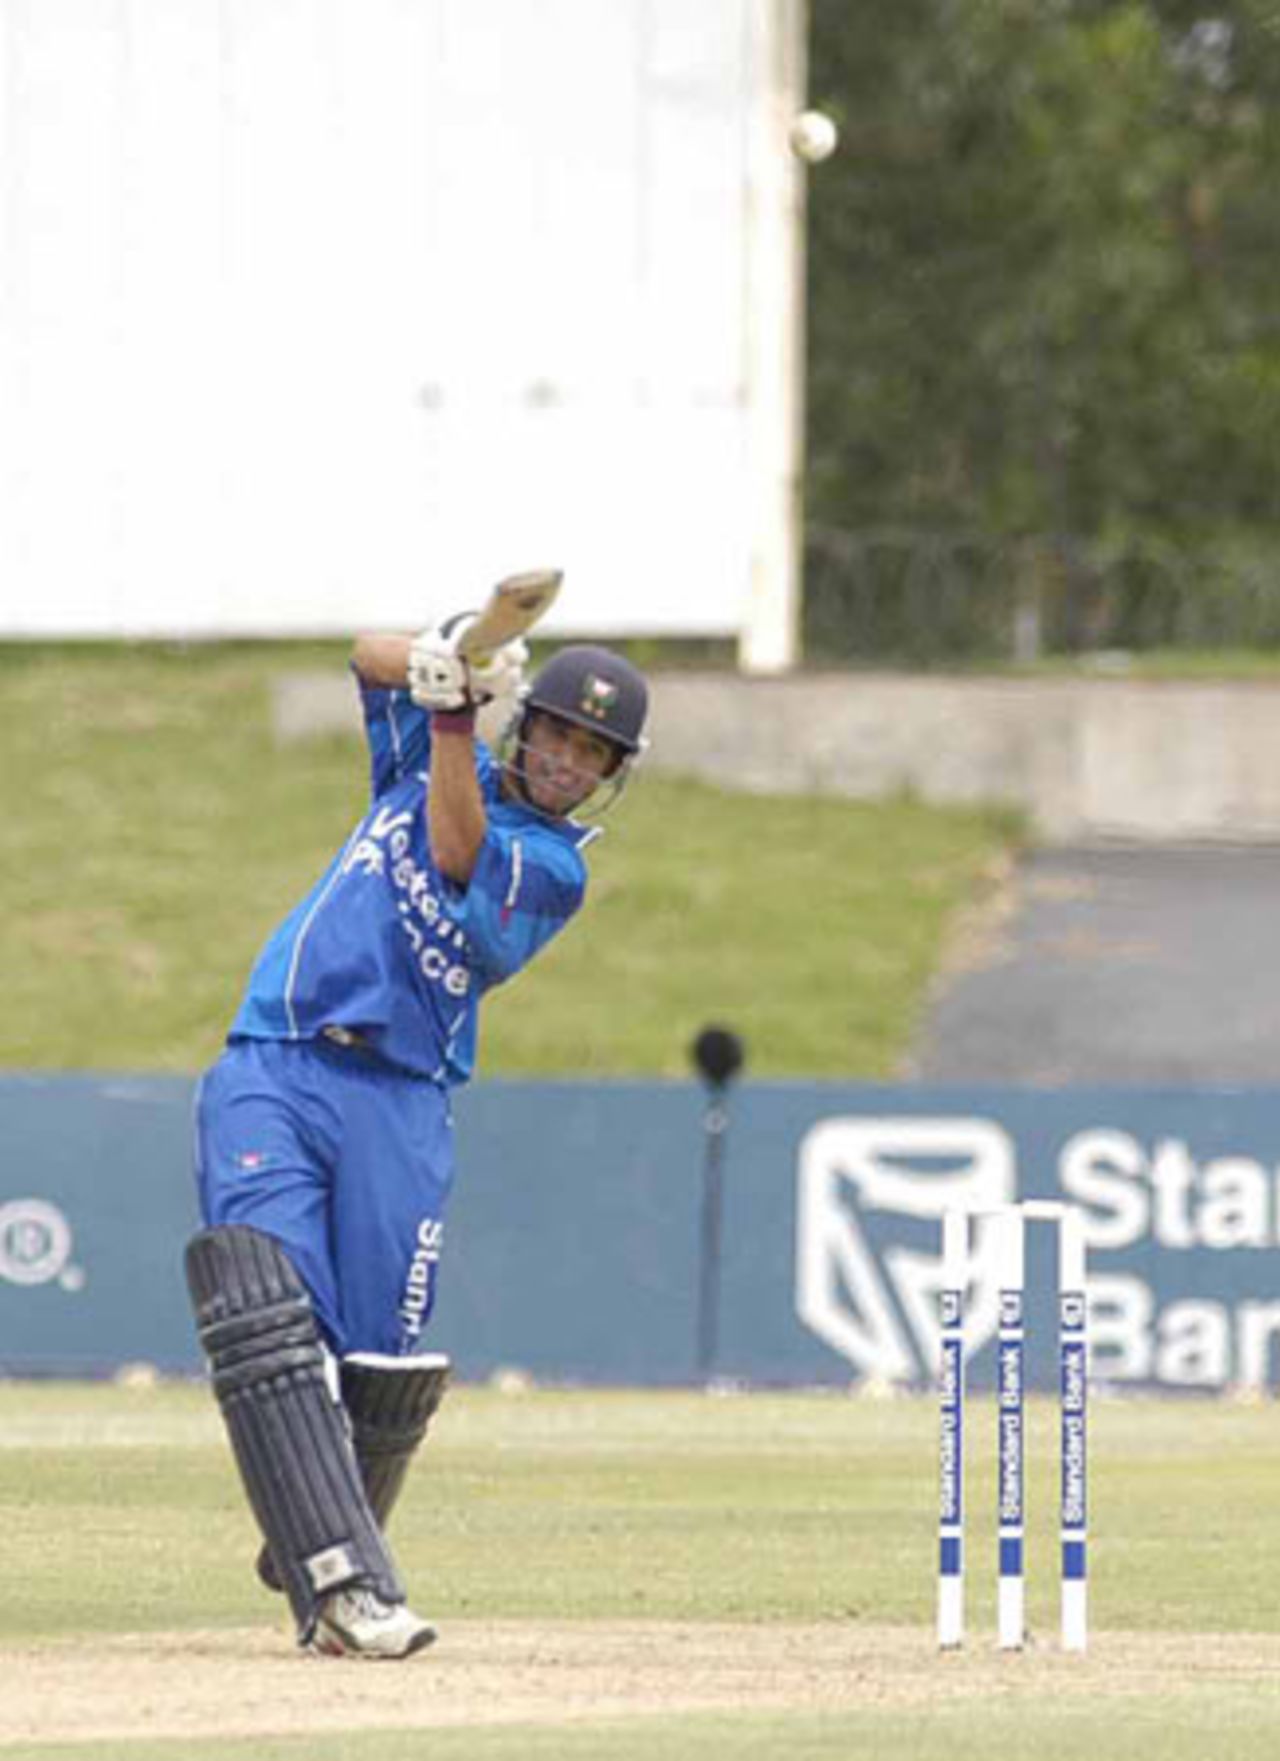 JP Duminy moves  to leg and hits a six in his innings of 69 against Boland